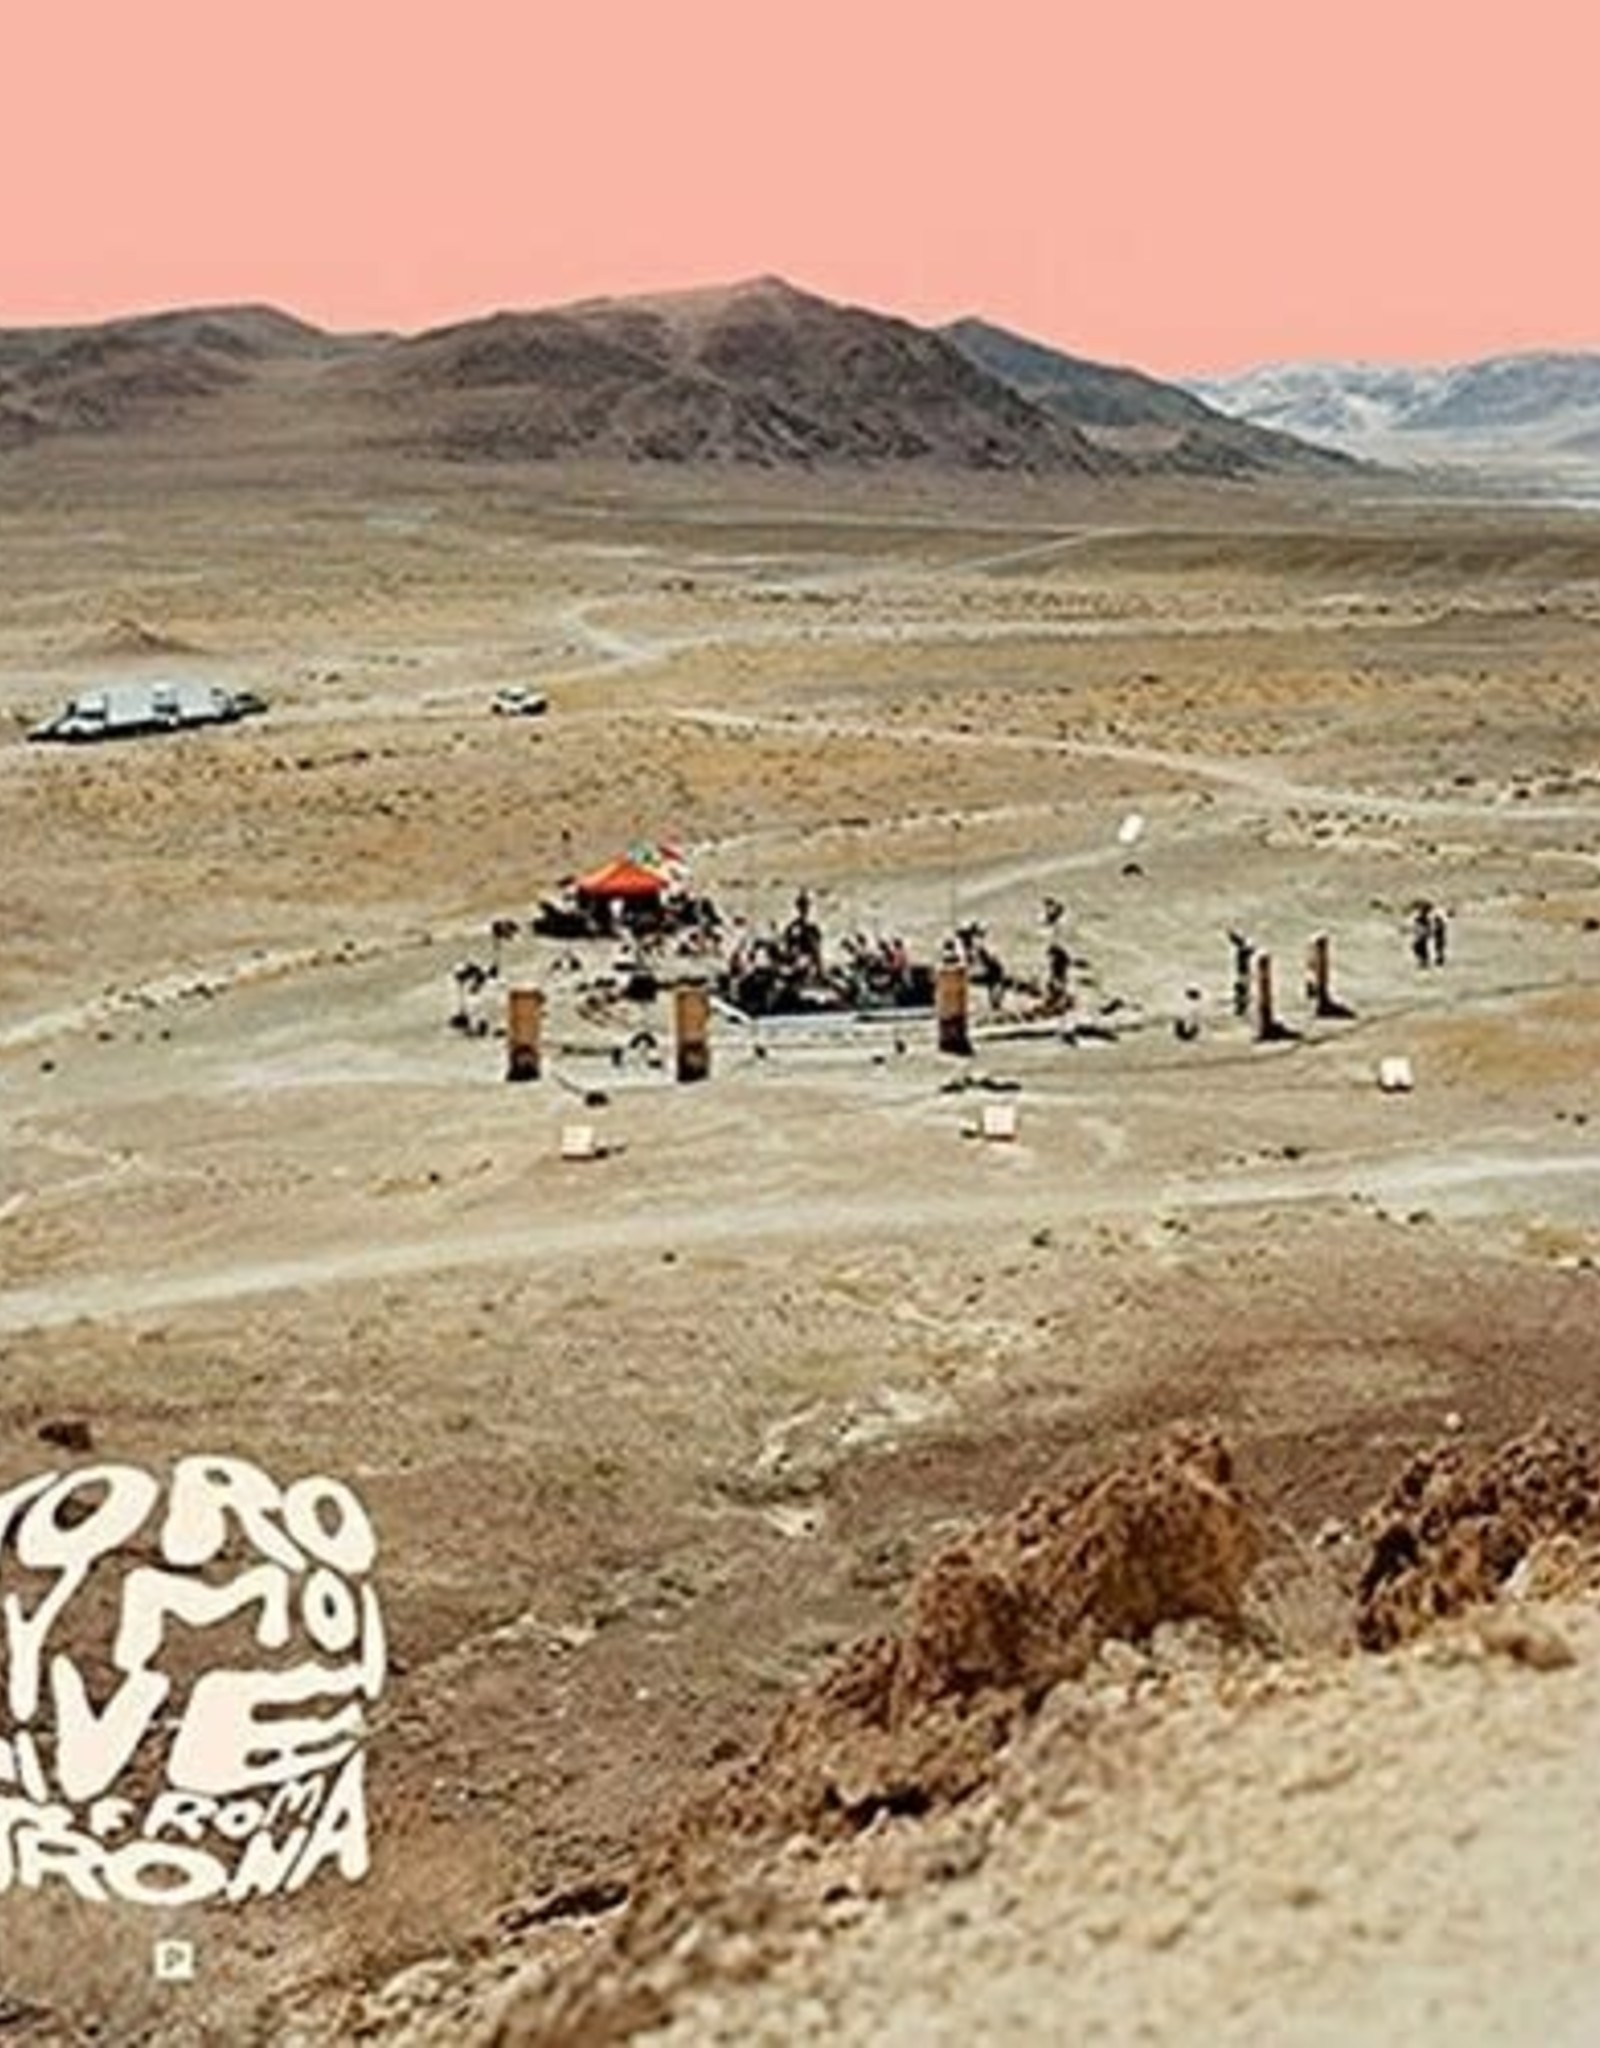 Toro Y Moi - Live From Trona